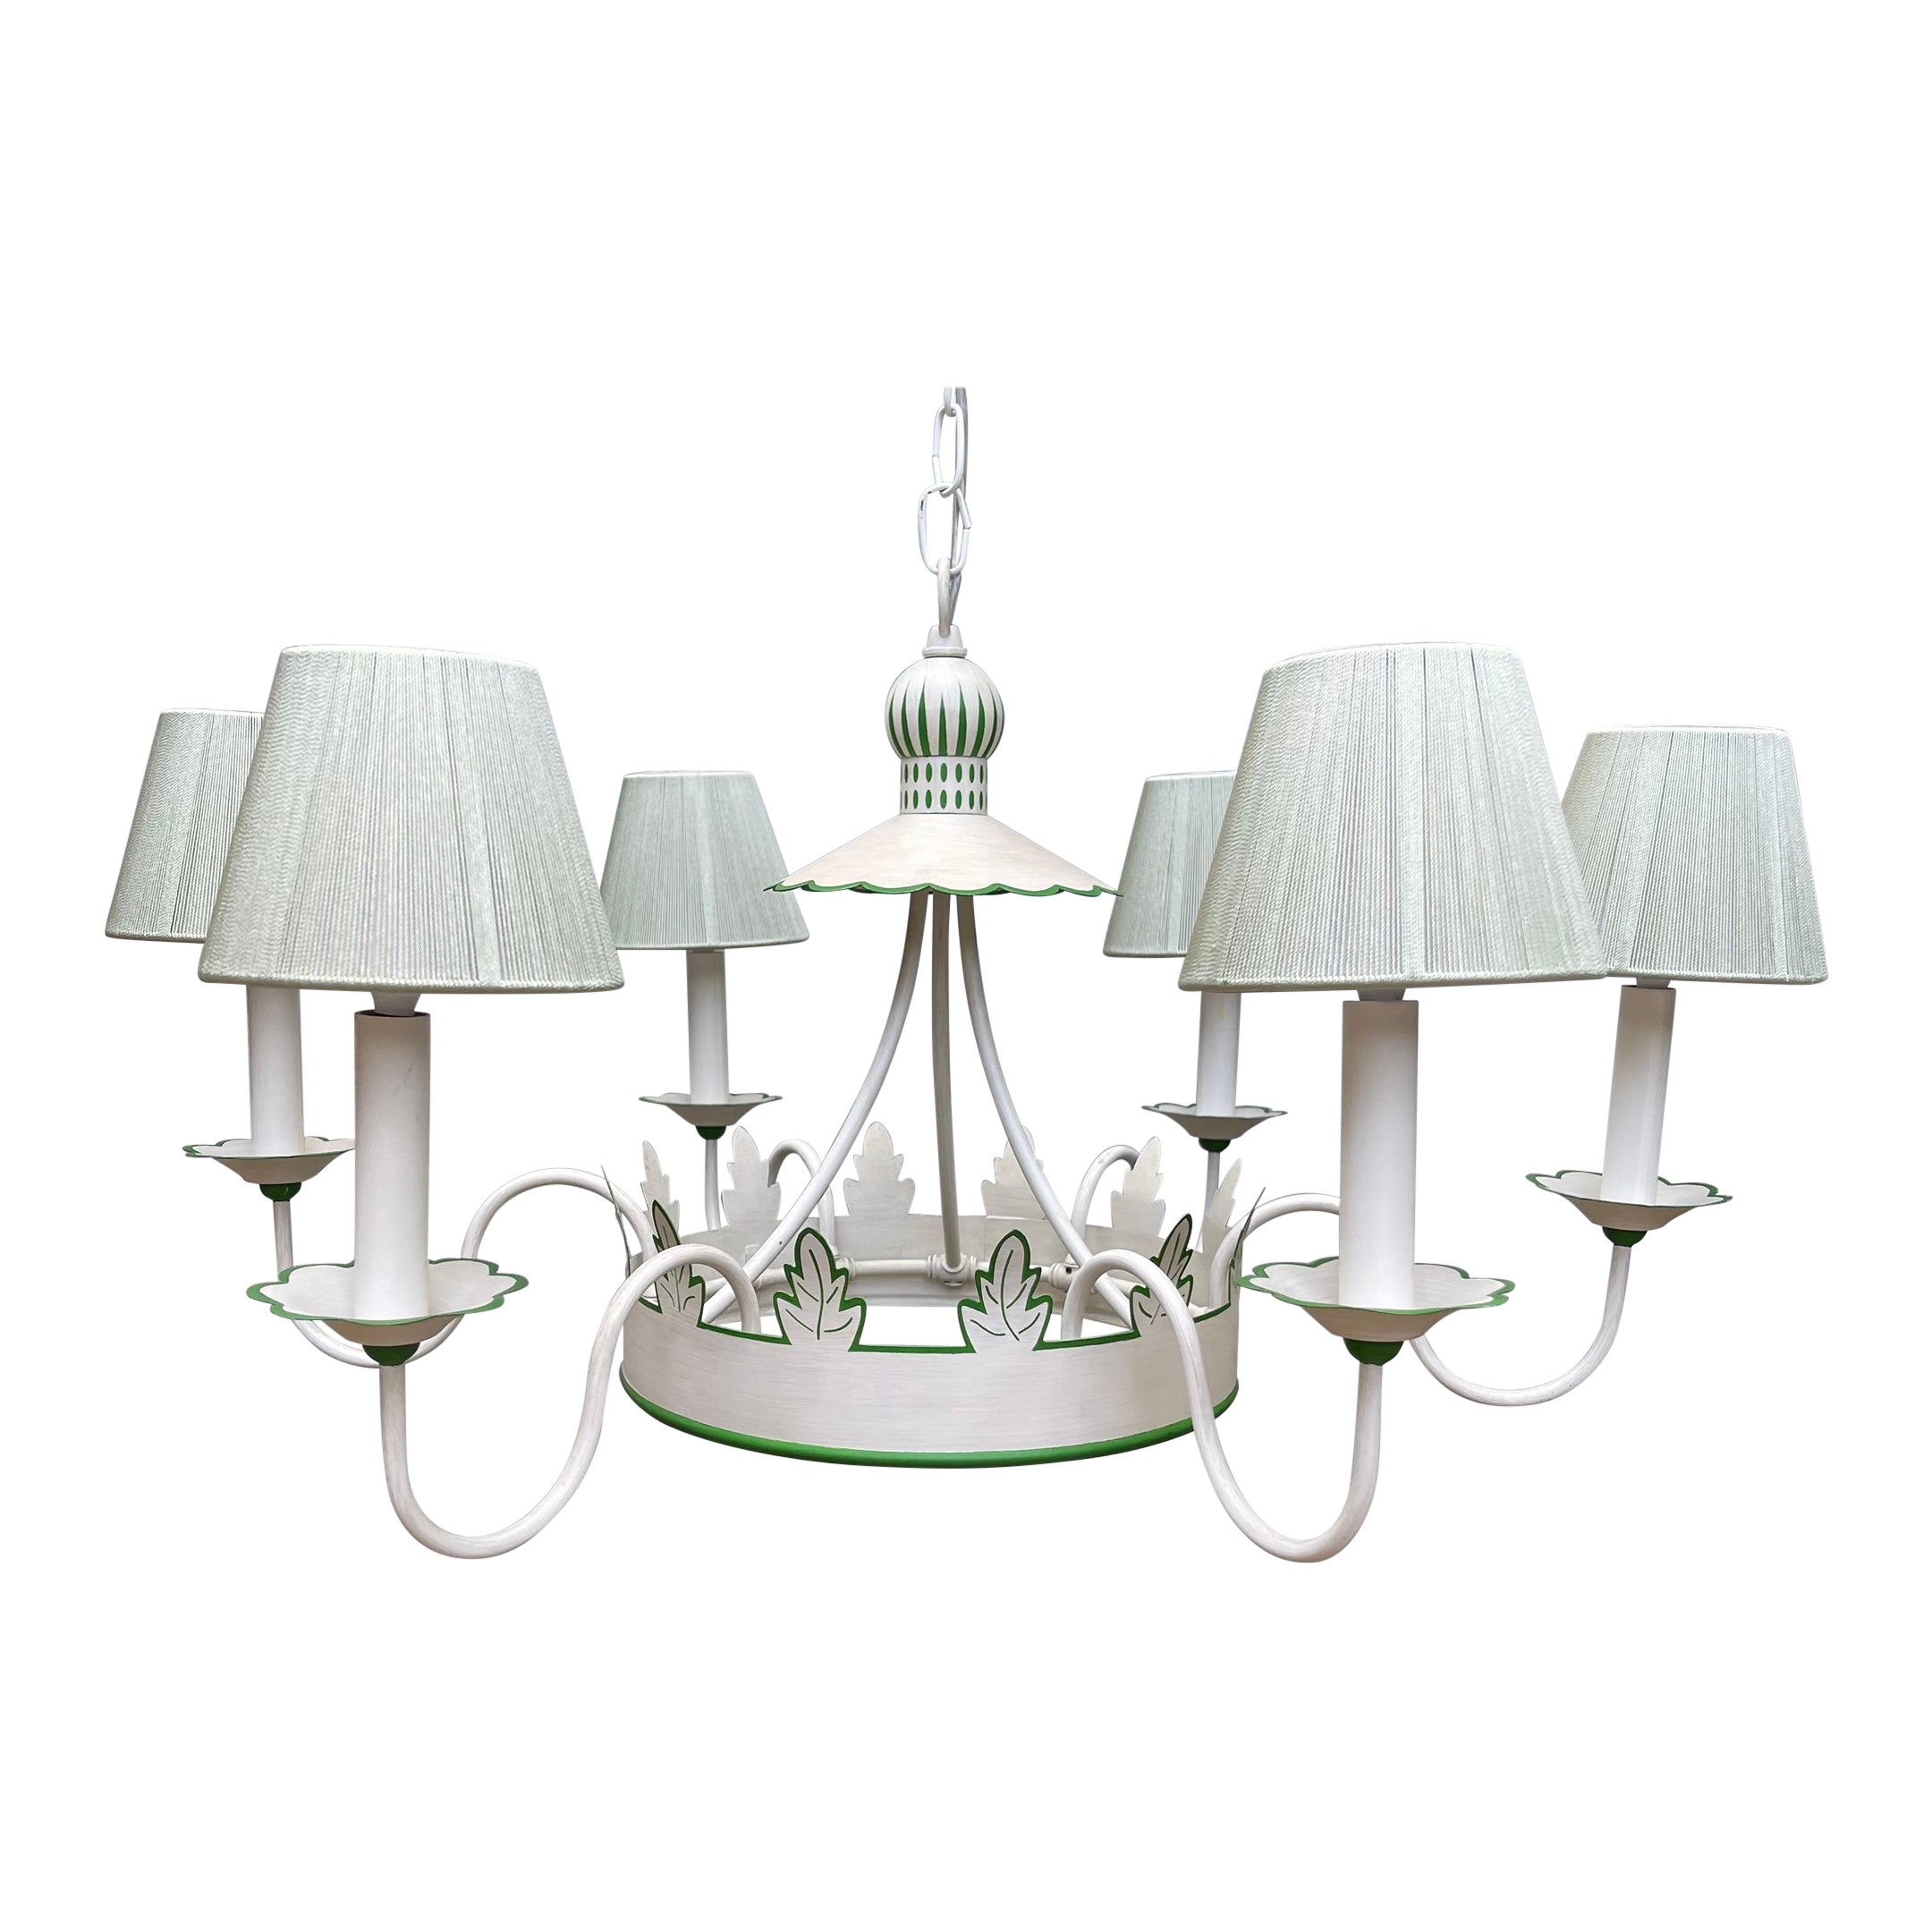 French Country Foliate 6 Light Painted Tole Chandelier, String Shades